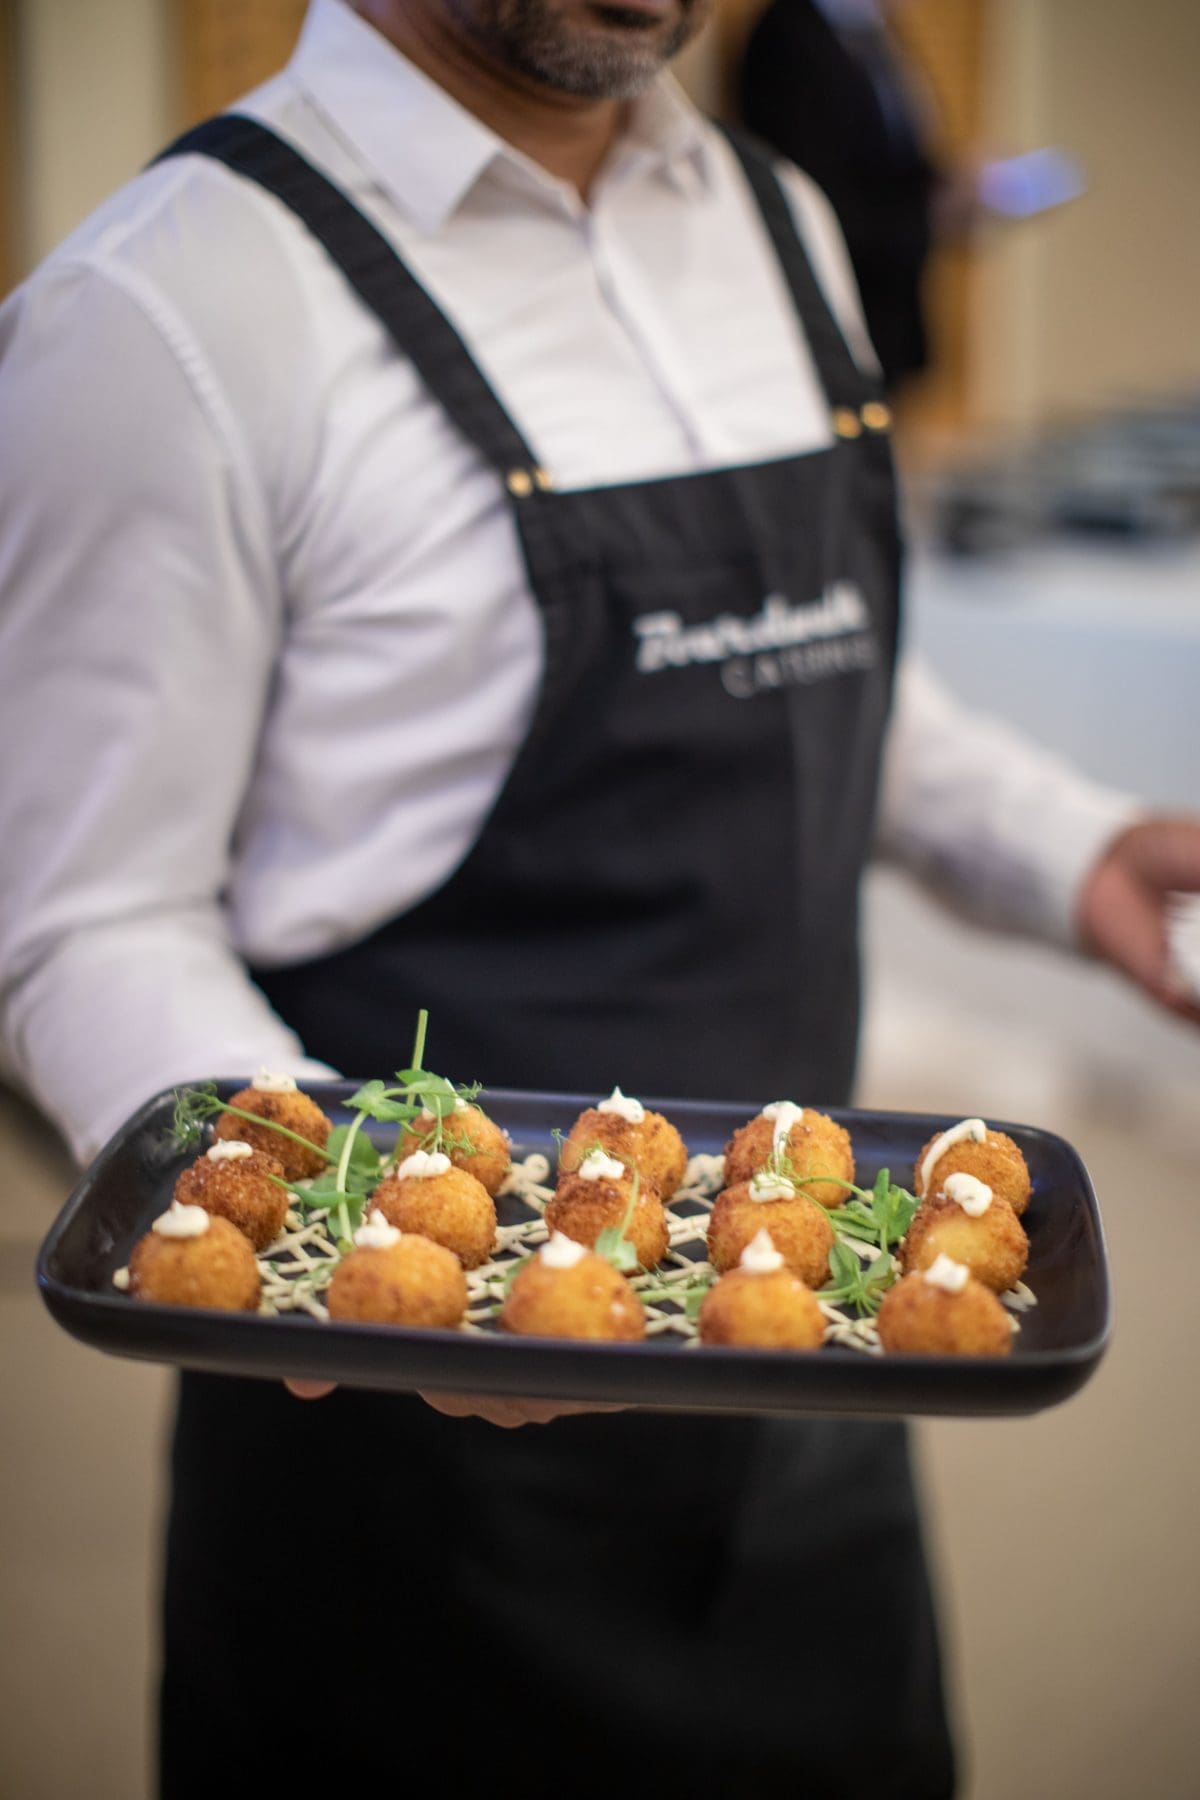 Canapes for wedding reception catering in Sydney